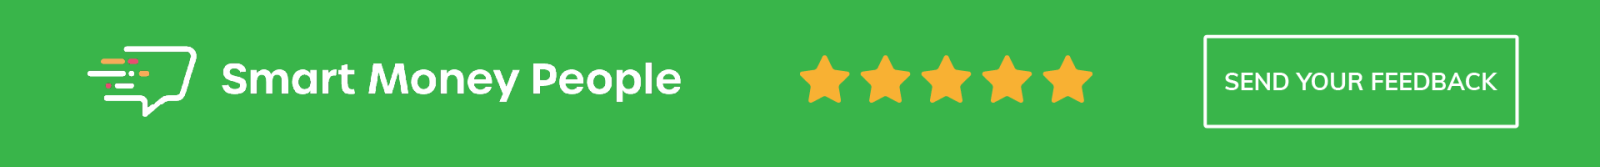 smart money people 5 star reviews, send your feedback today